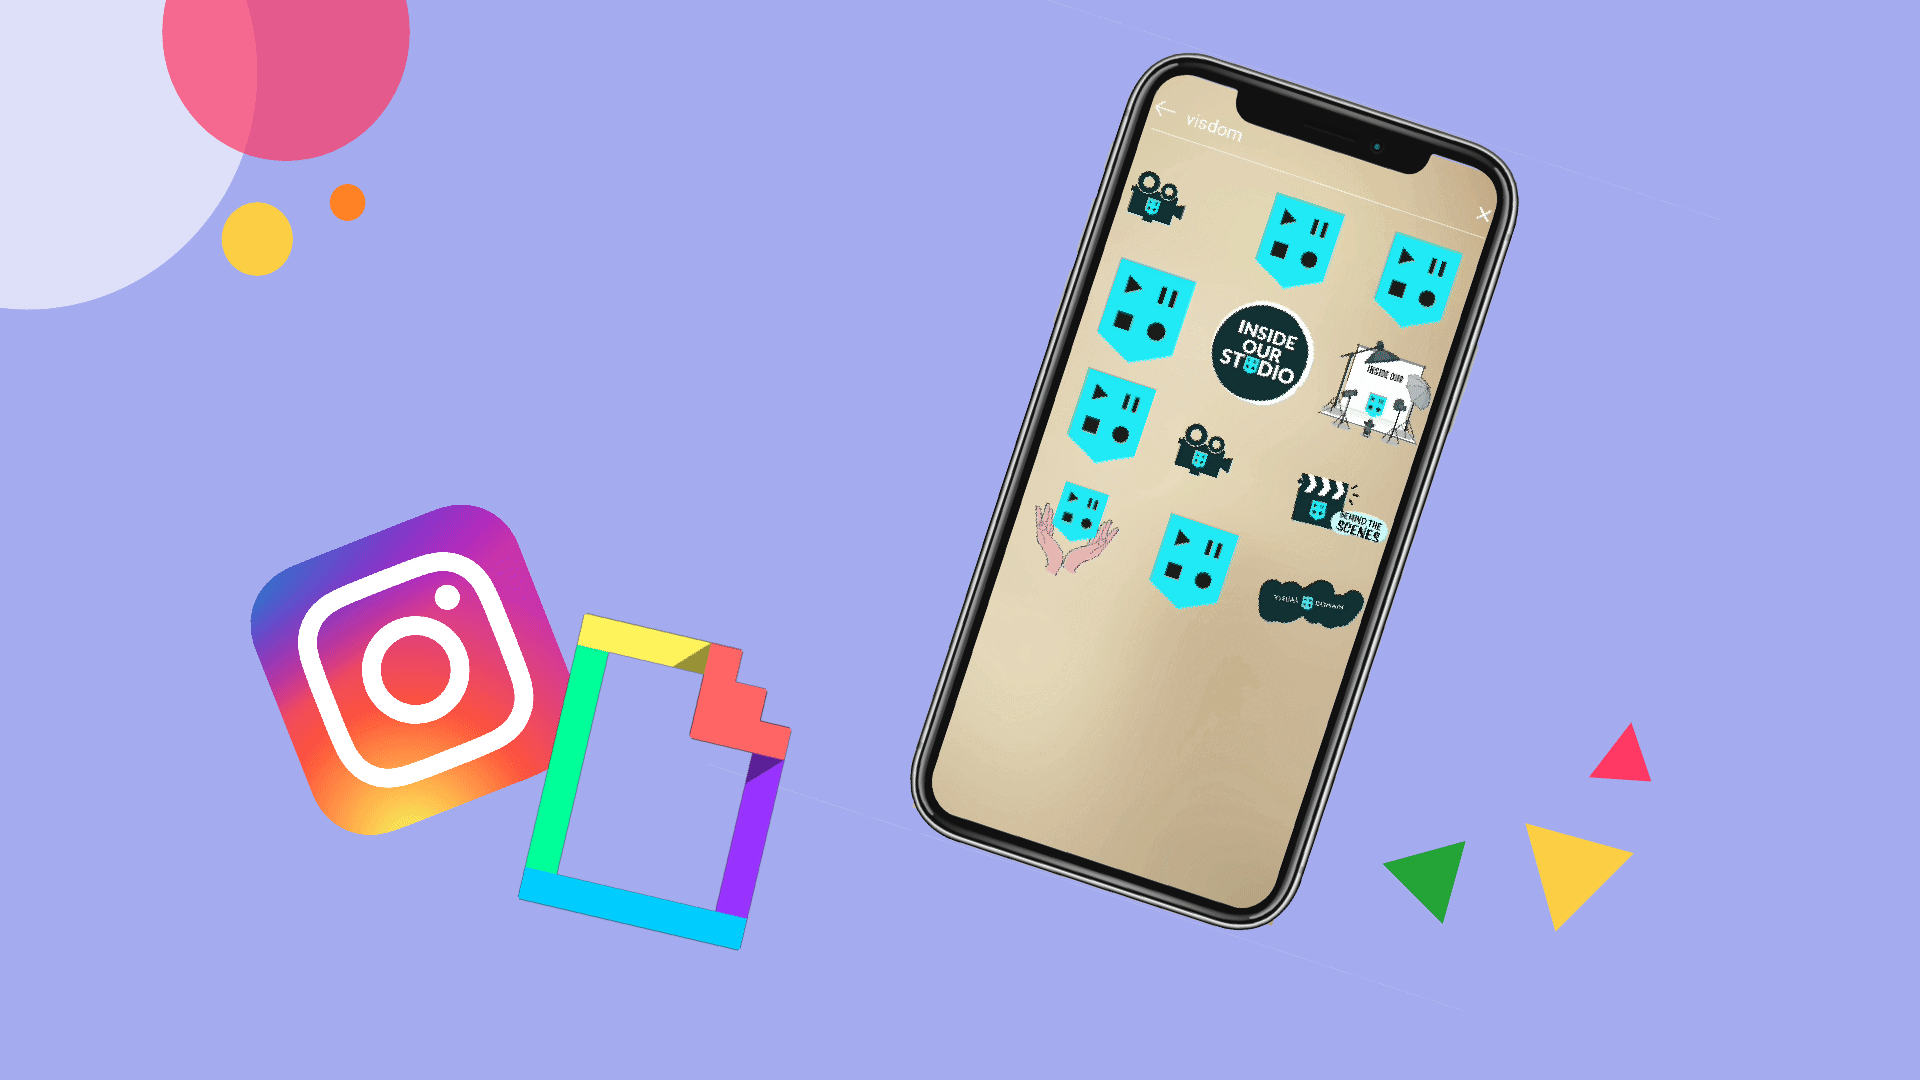 Make Your Own GiF Stickers - Easy!